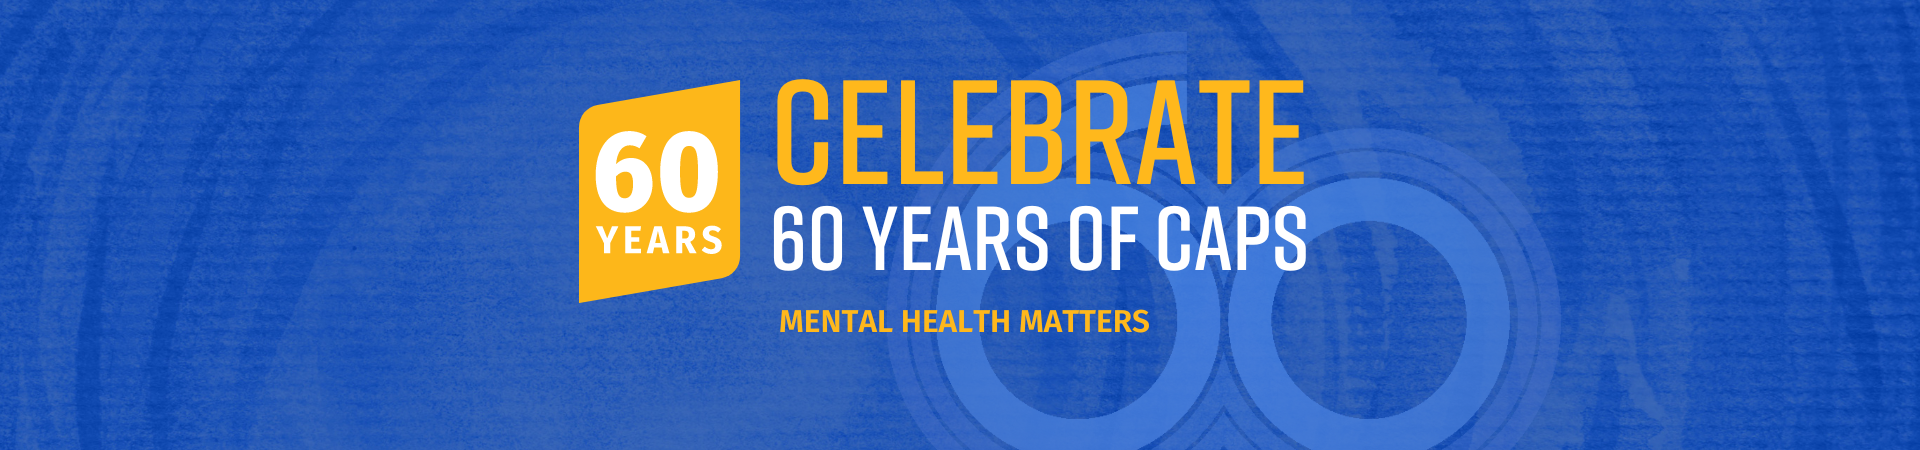 Celebrate 60 Years of CAPS Web Banner in Blue, Yellow, and White